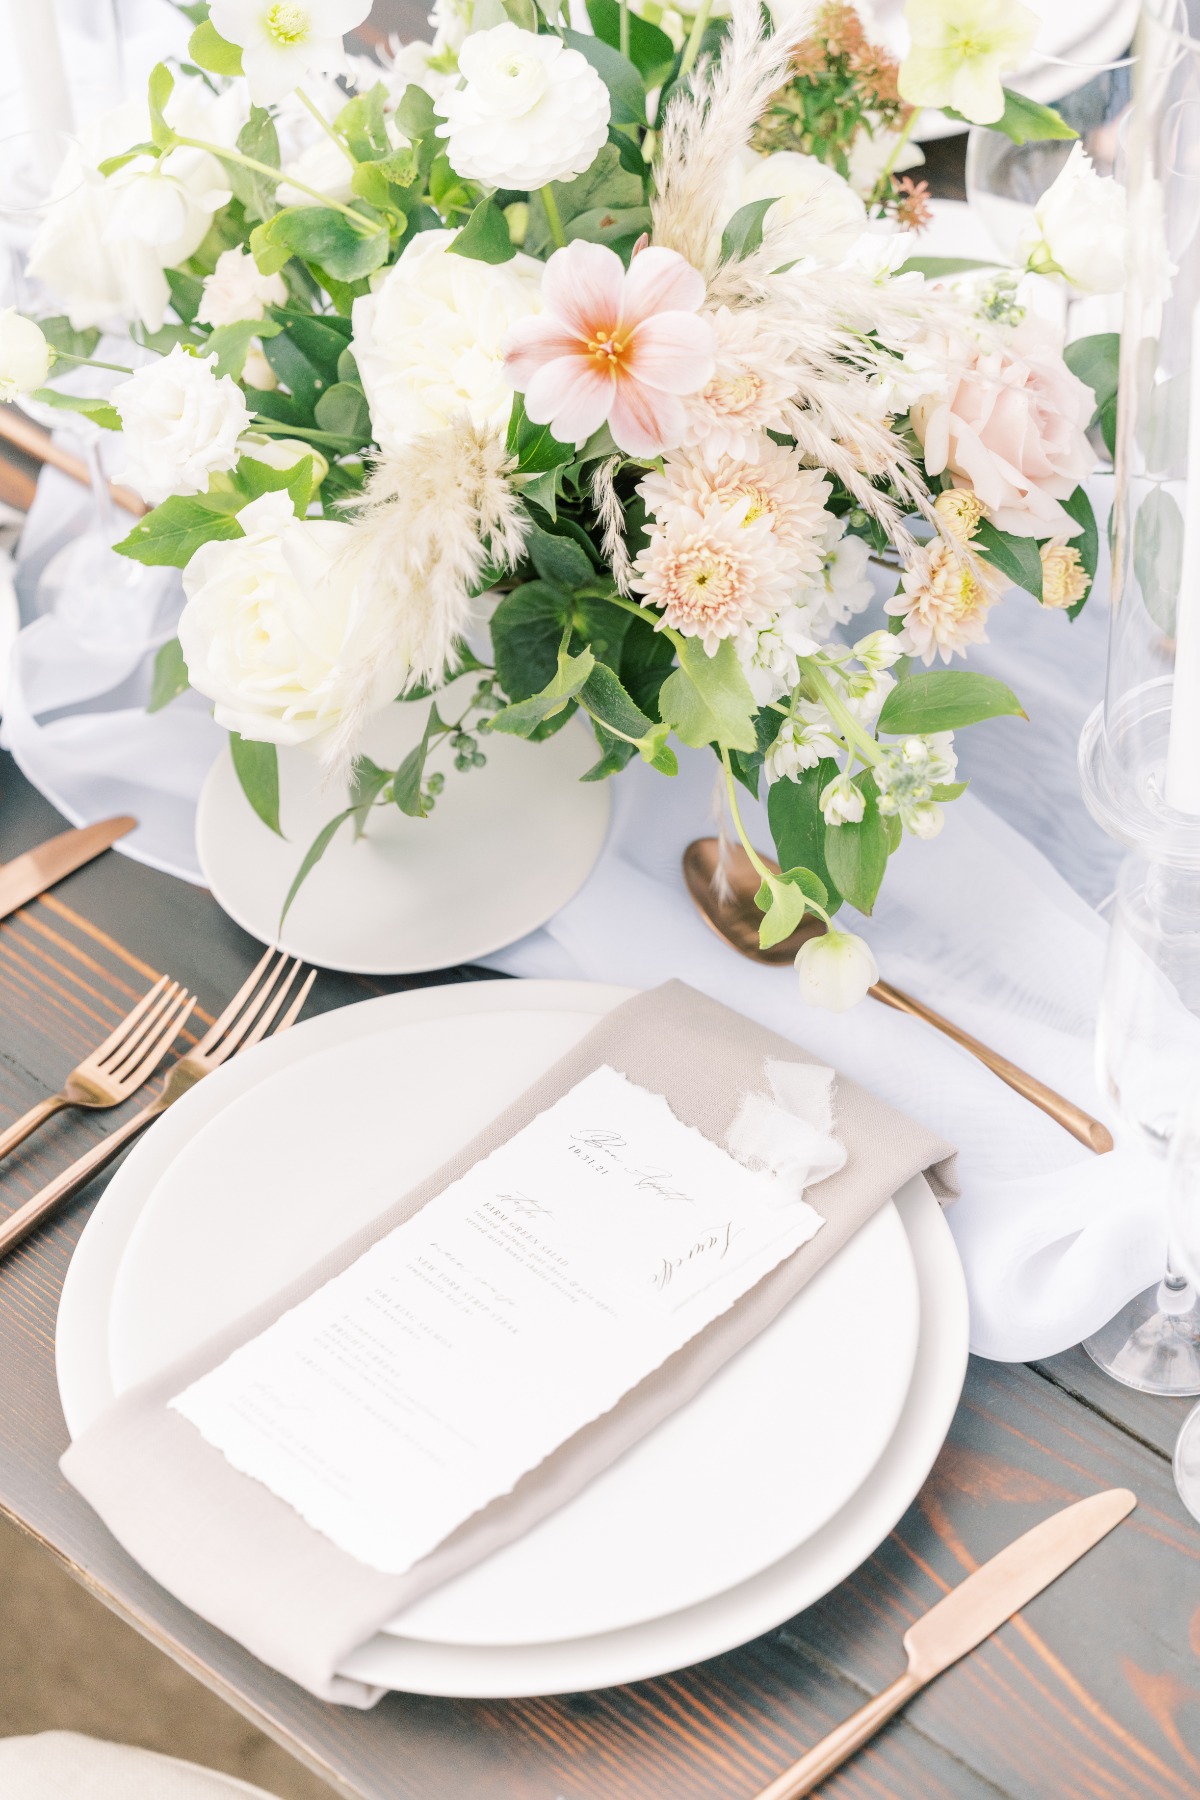 Reception table setting and centerpiece